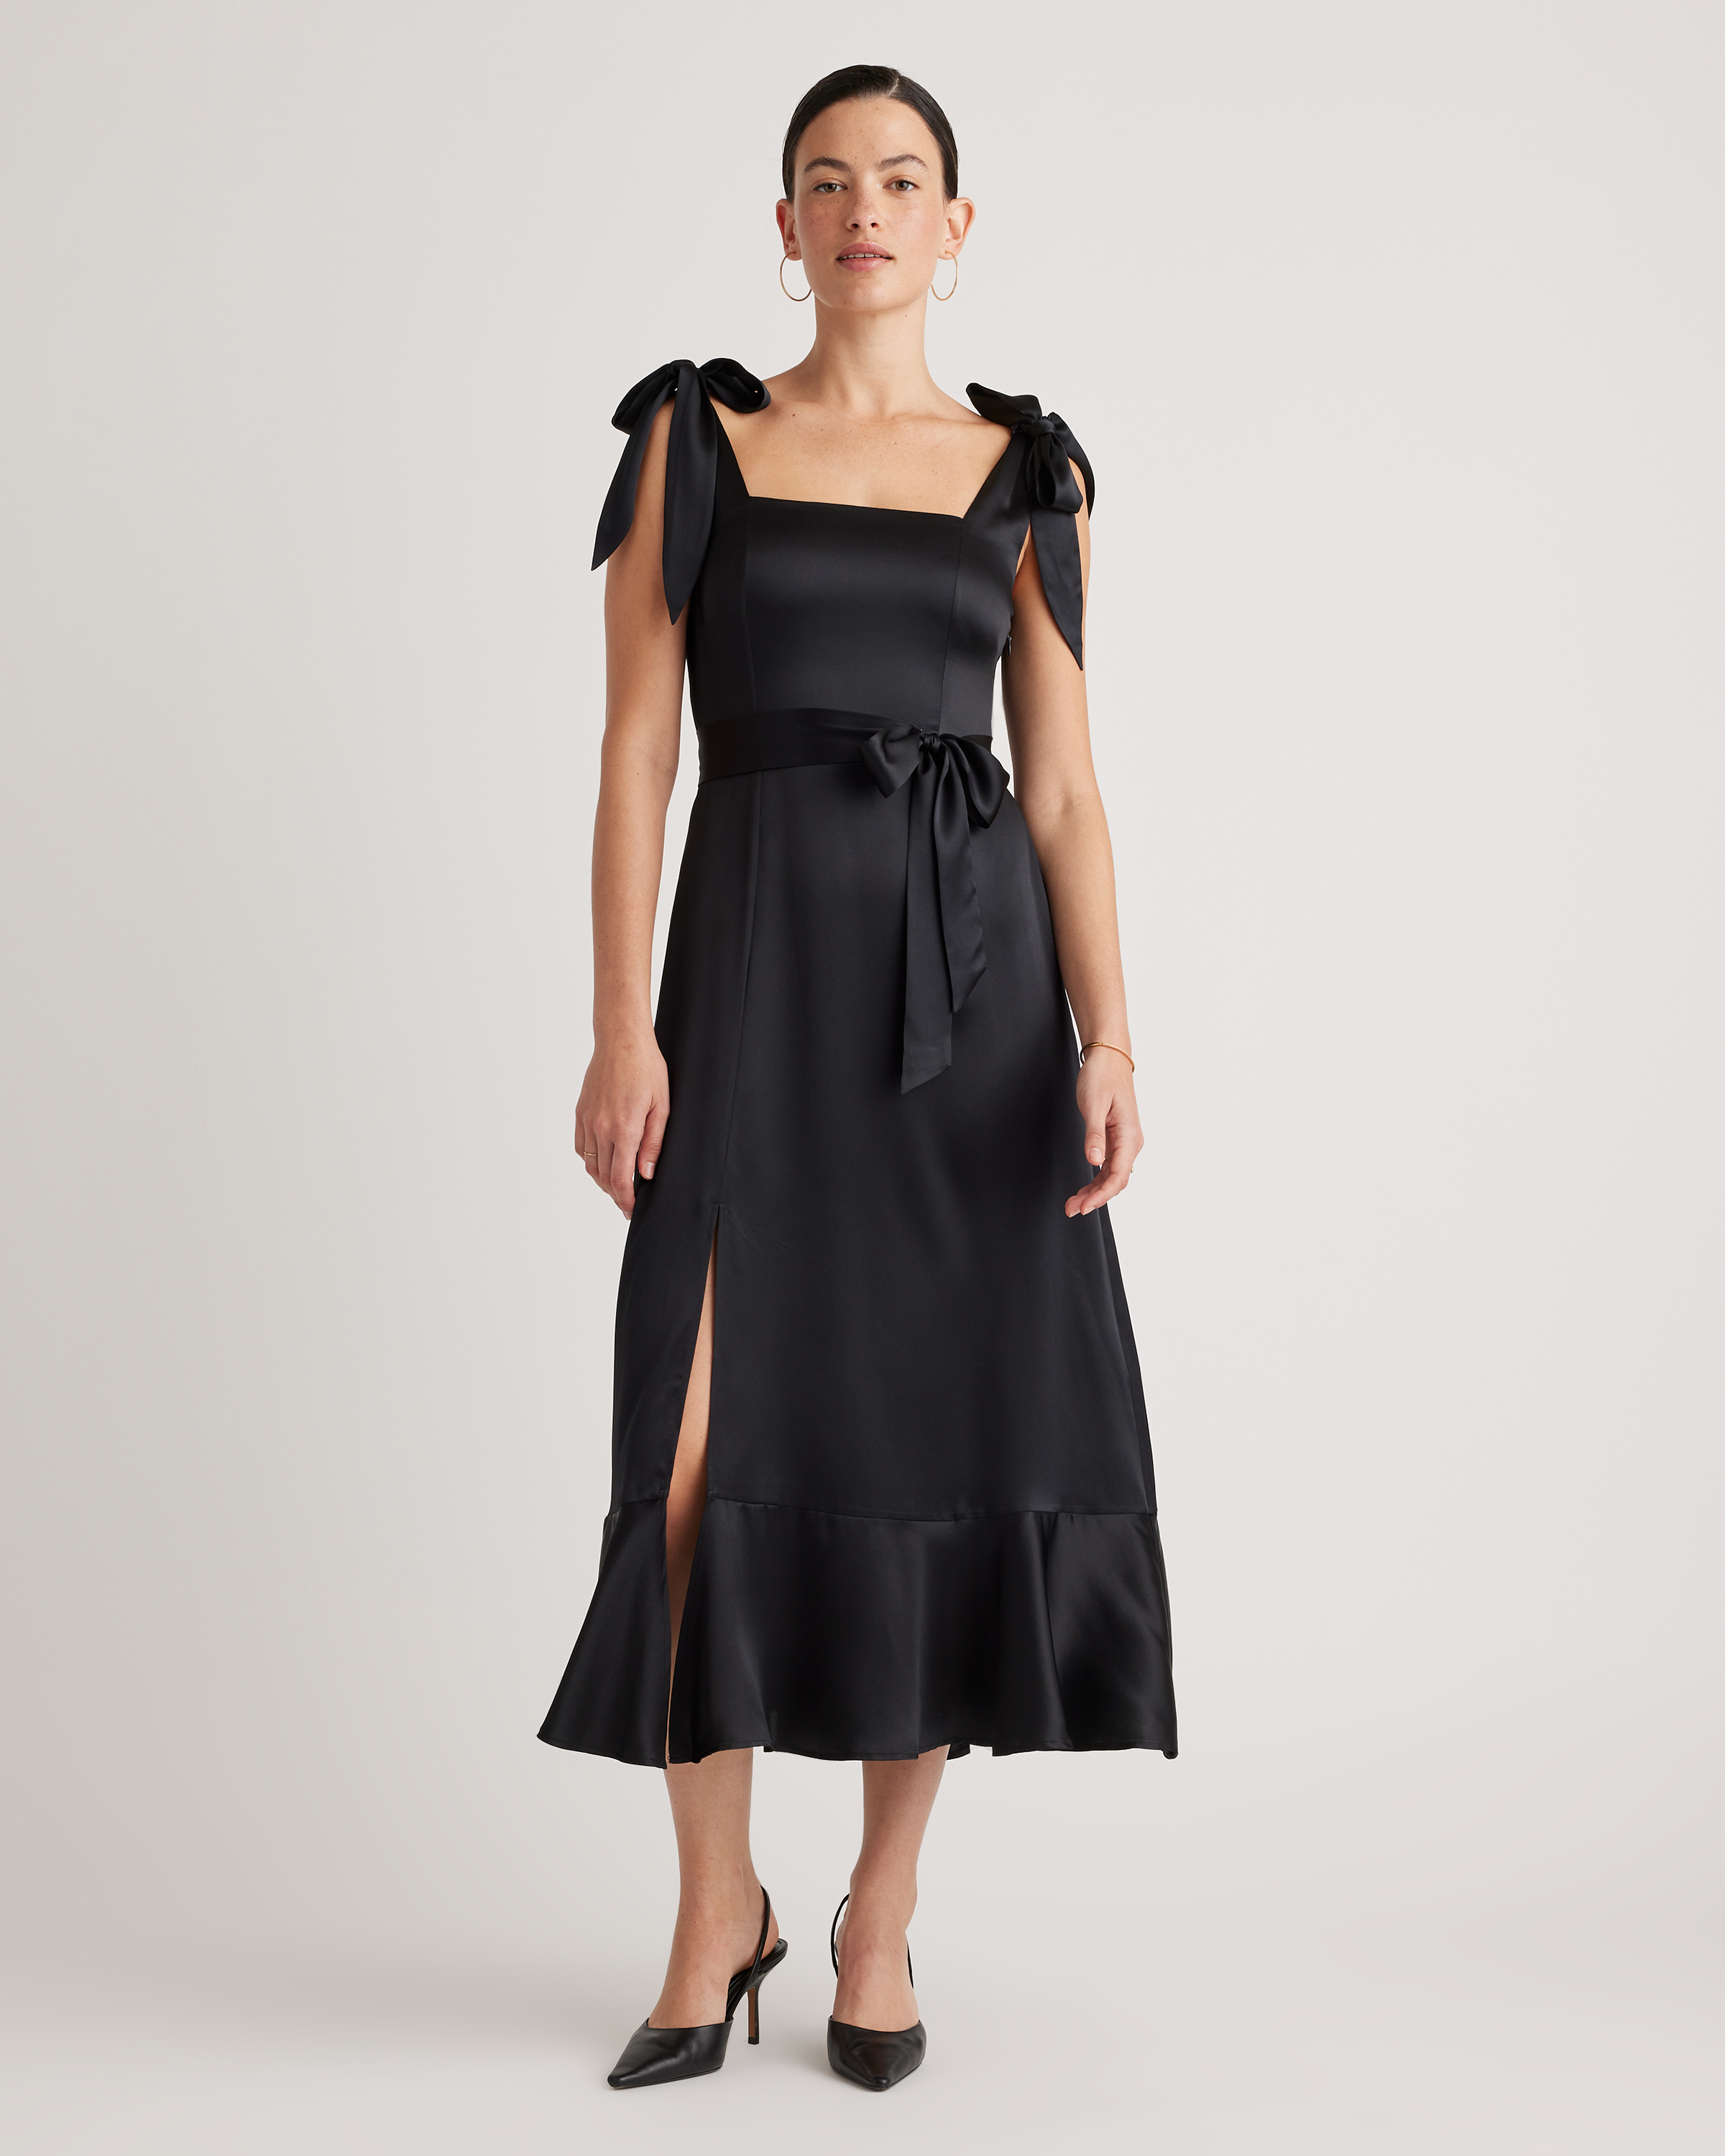 Eugenia - A statement satin gown